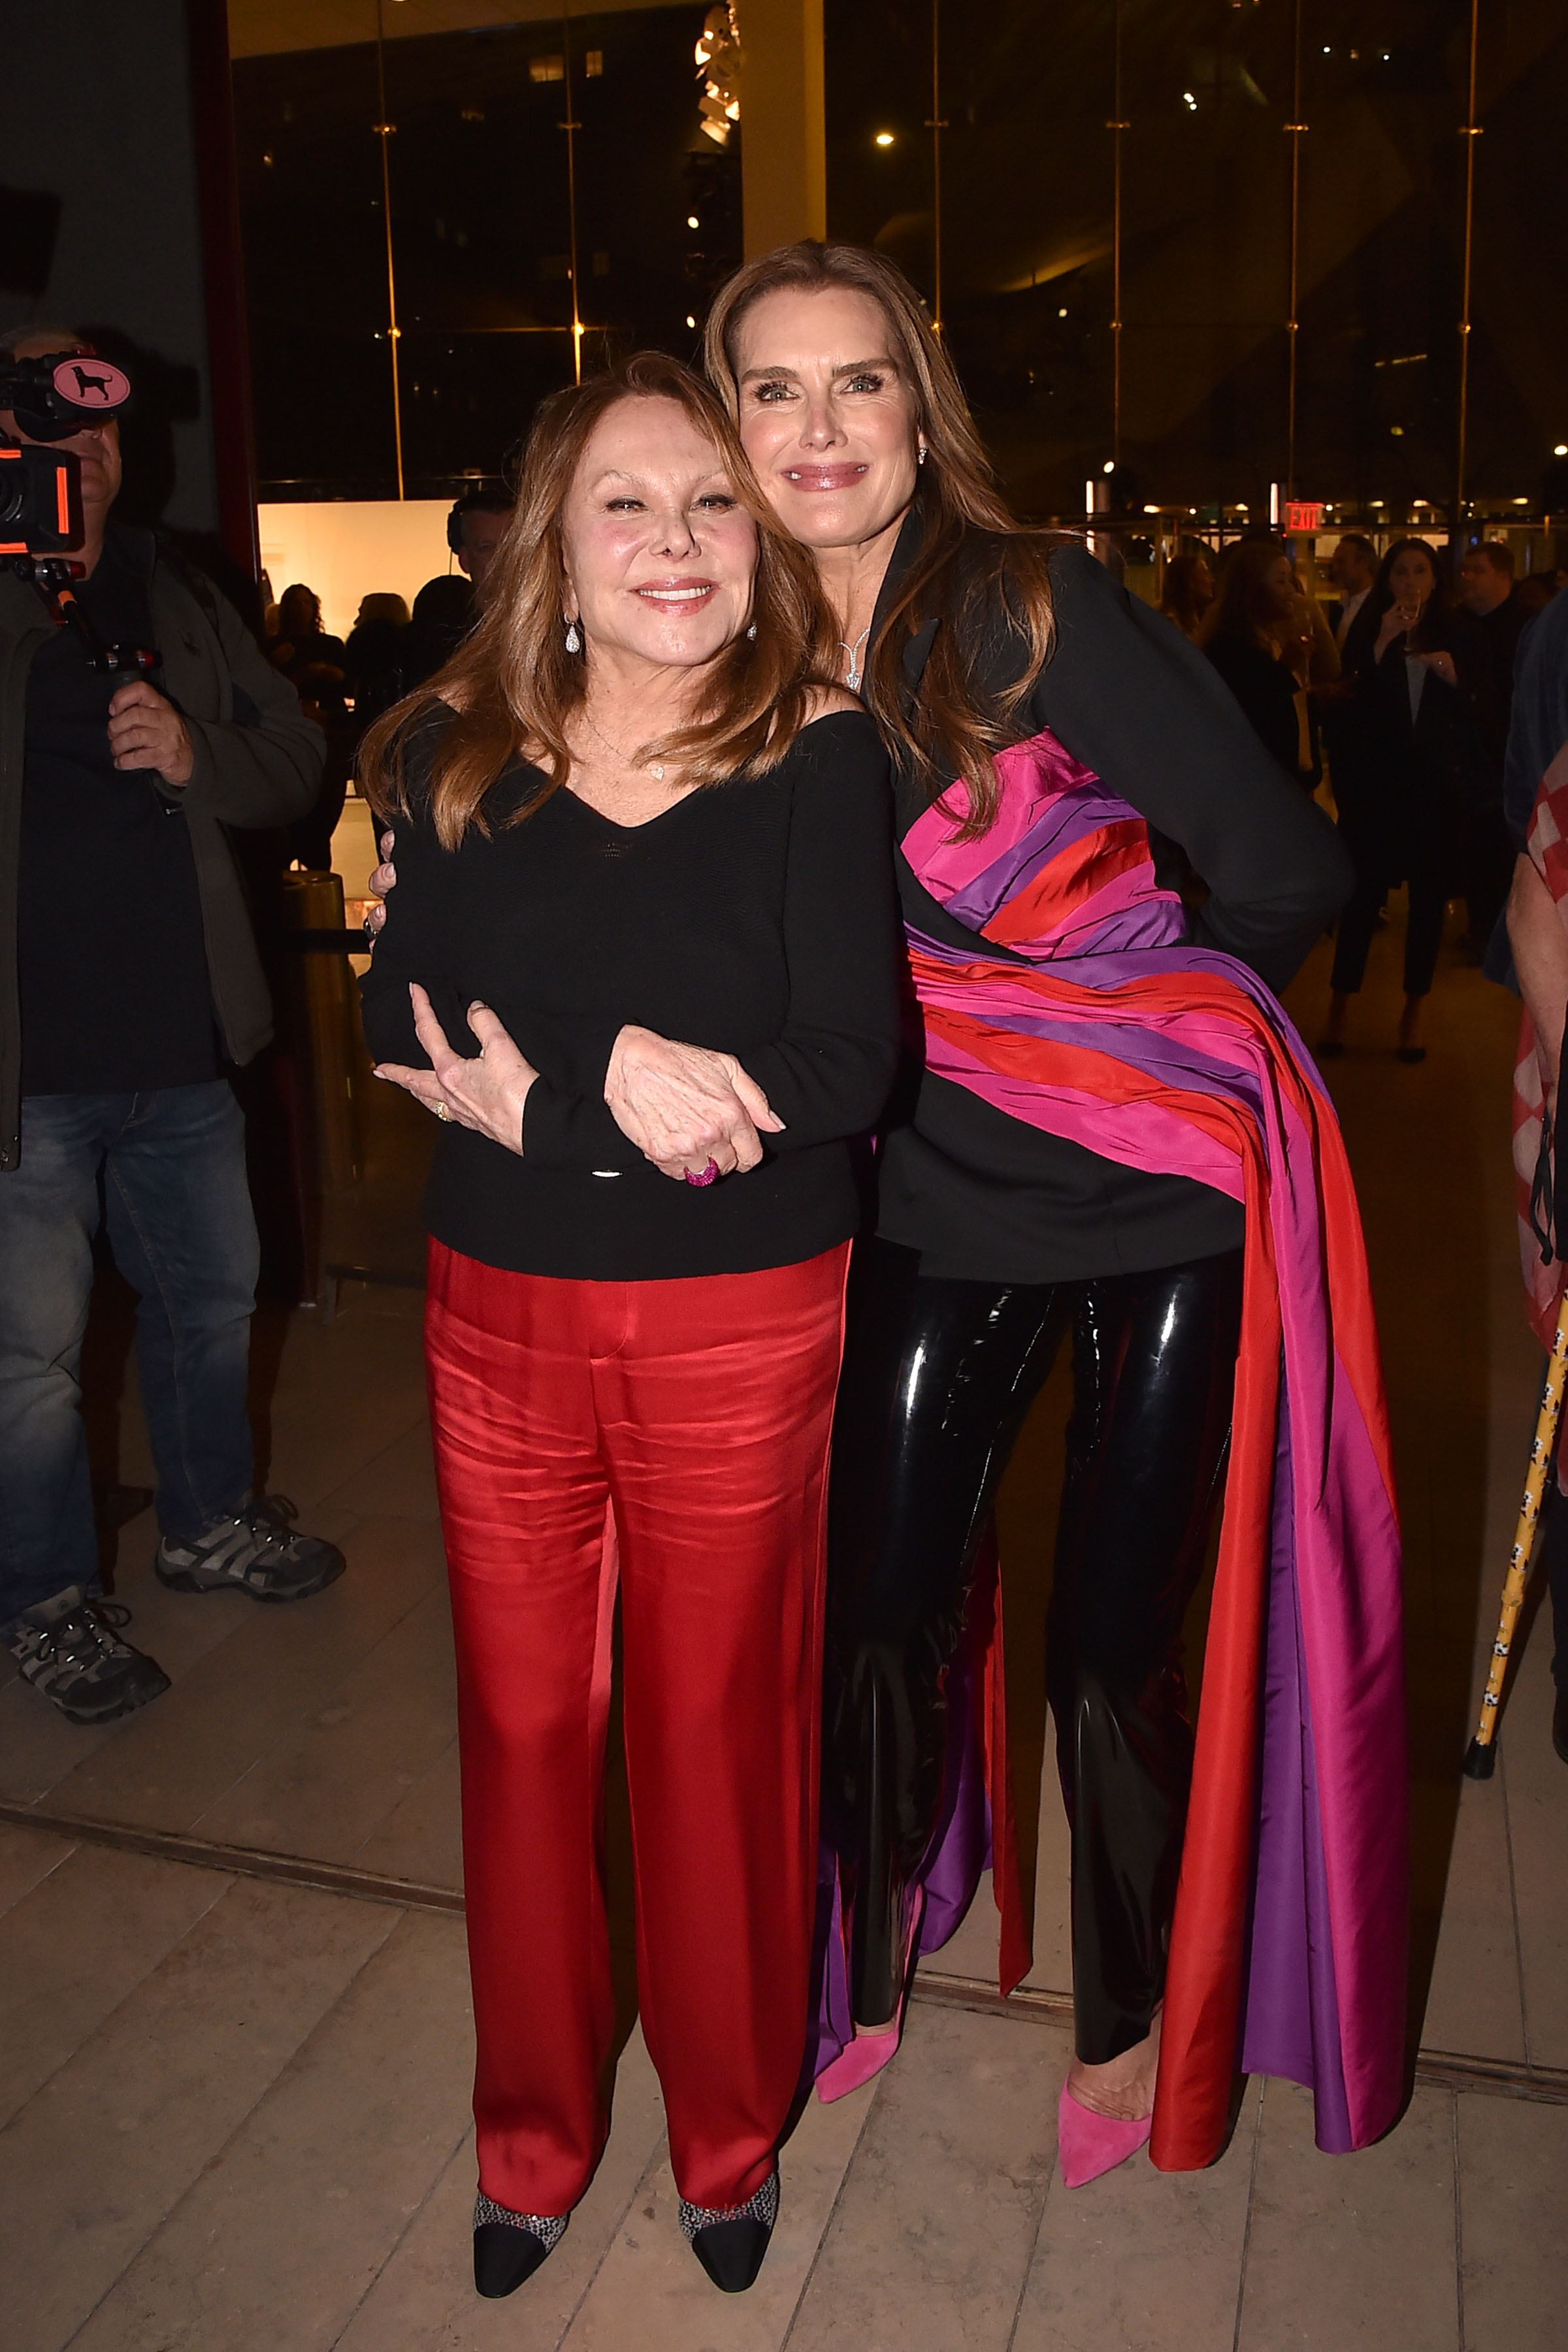 Marlo Thomas and Brooke Shields at the "Pretty Baby: Brooke Shields" premiere on March 29, 2023, in New York | Source: Getty Images